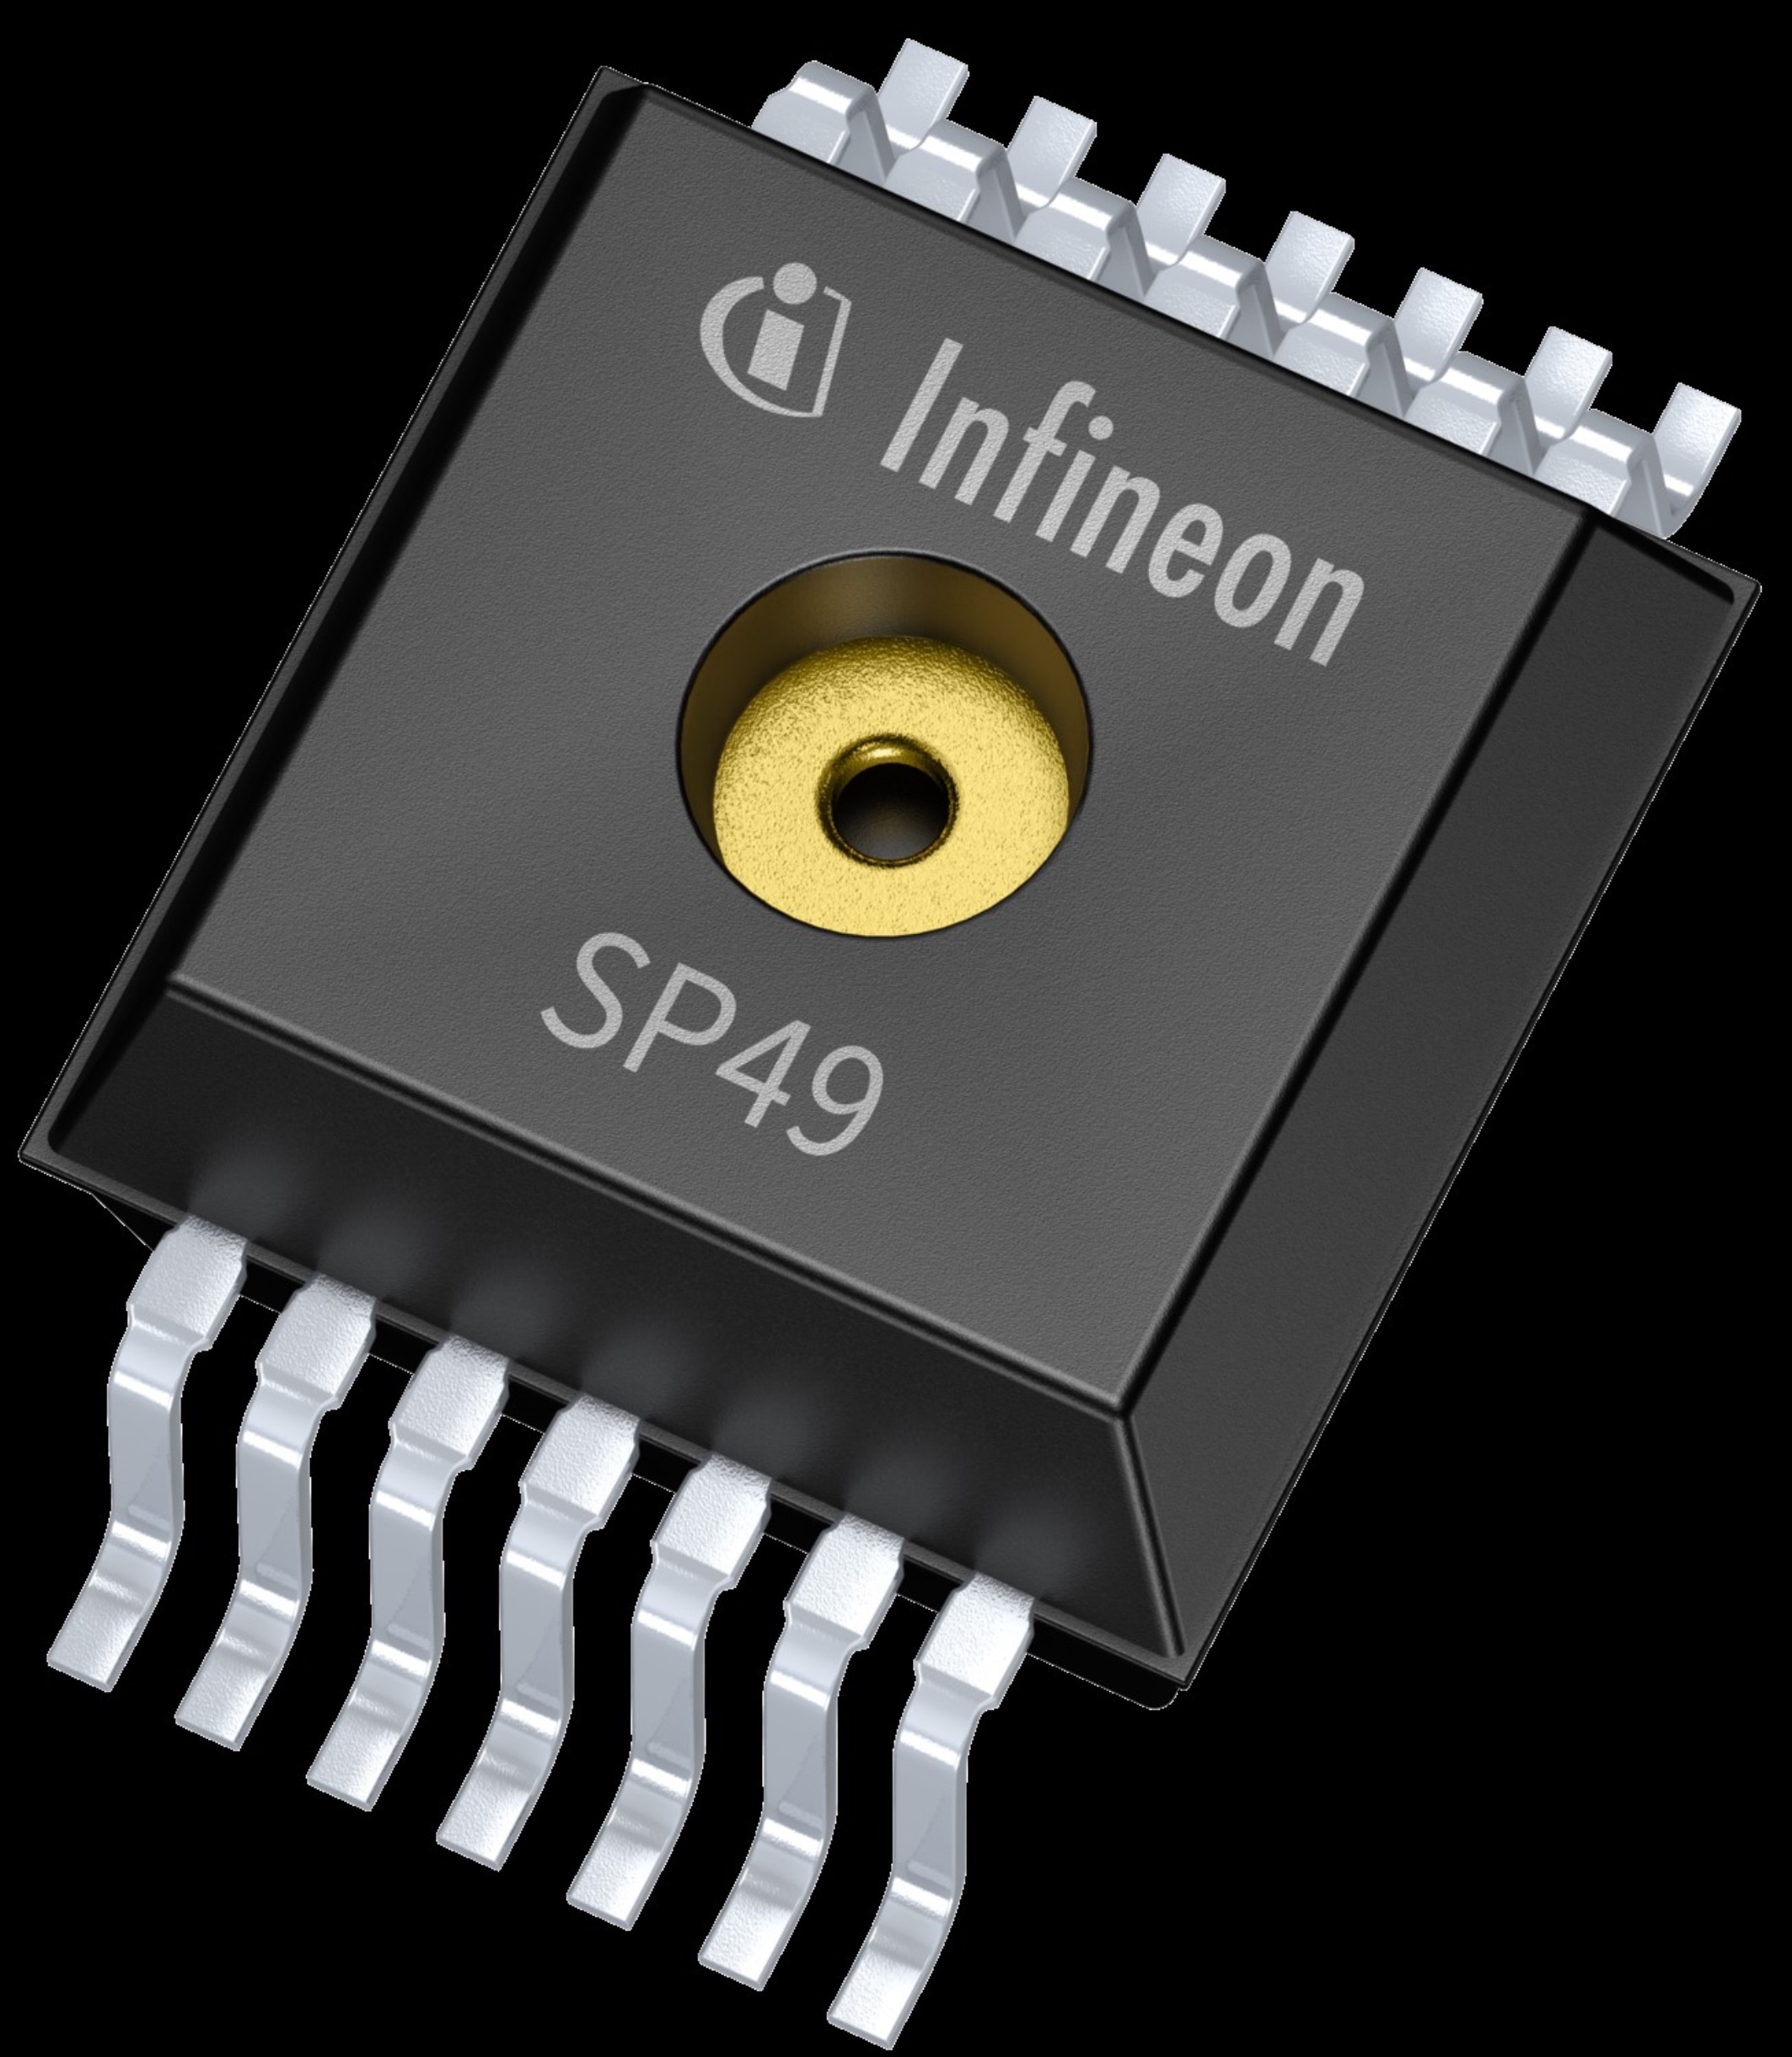 Infineon Presents Tire Pressure Sensor with Intelligent Features for Tire Pressure Monitoring Systems